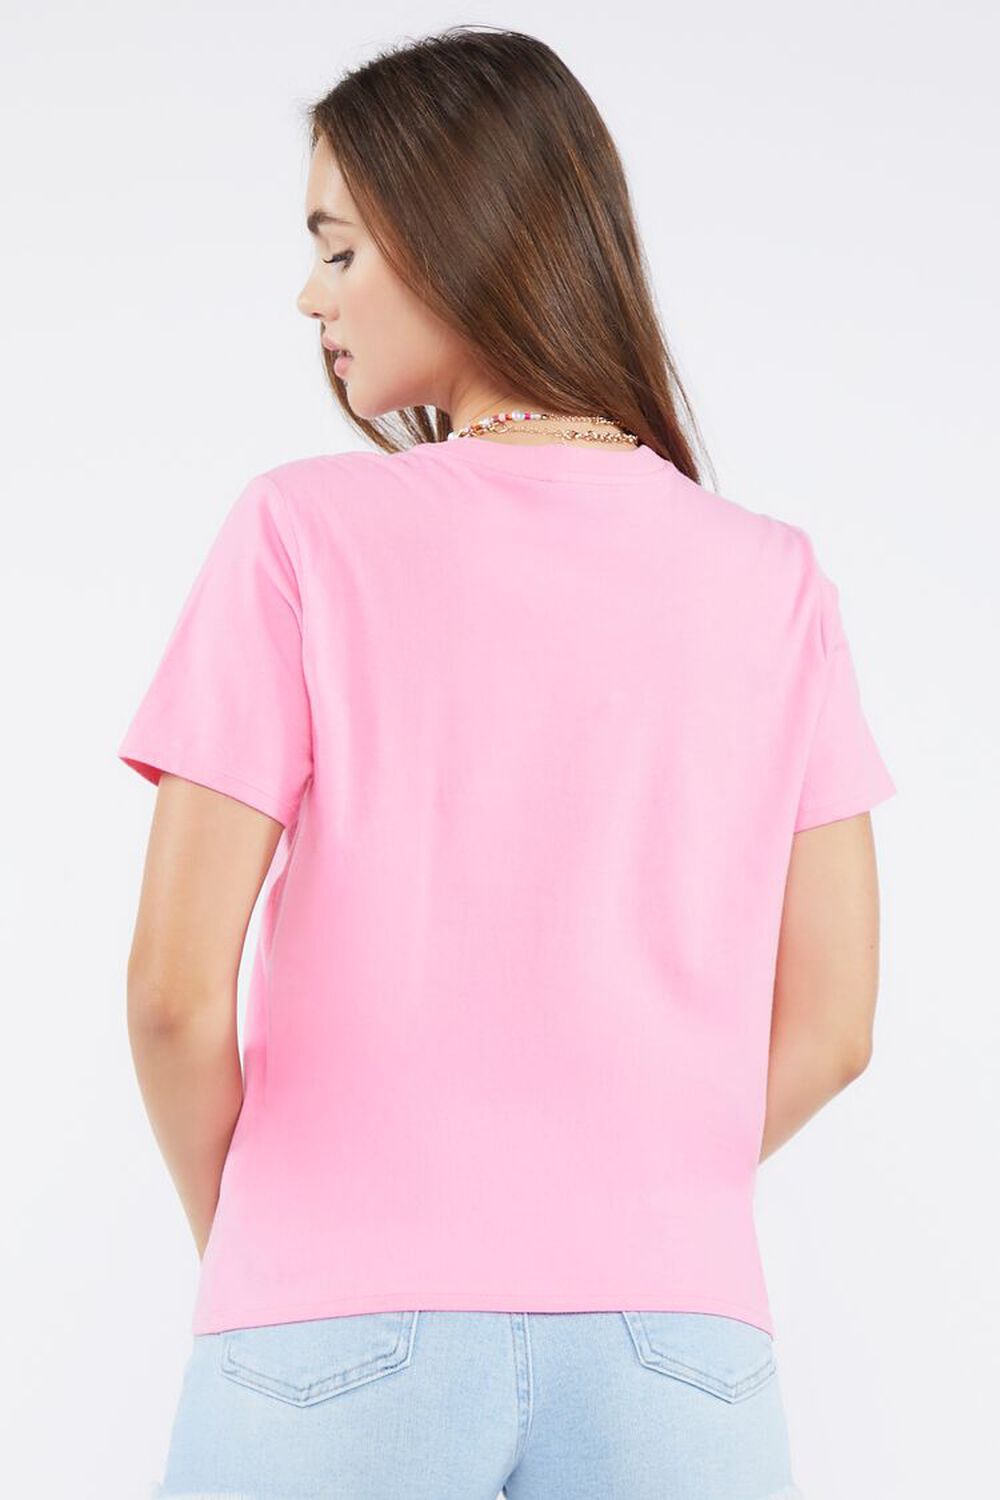 PINK/MULTI Organically Grown Cotton Graphic Tee, image 3